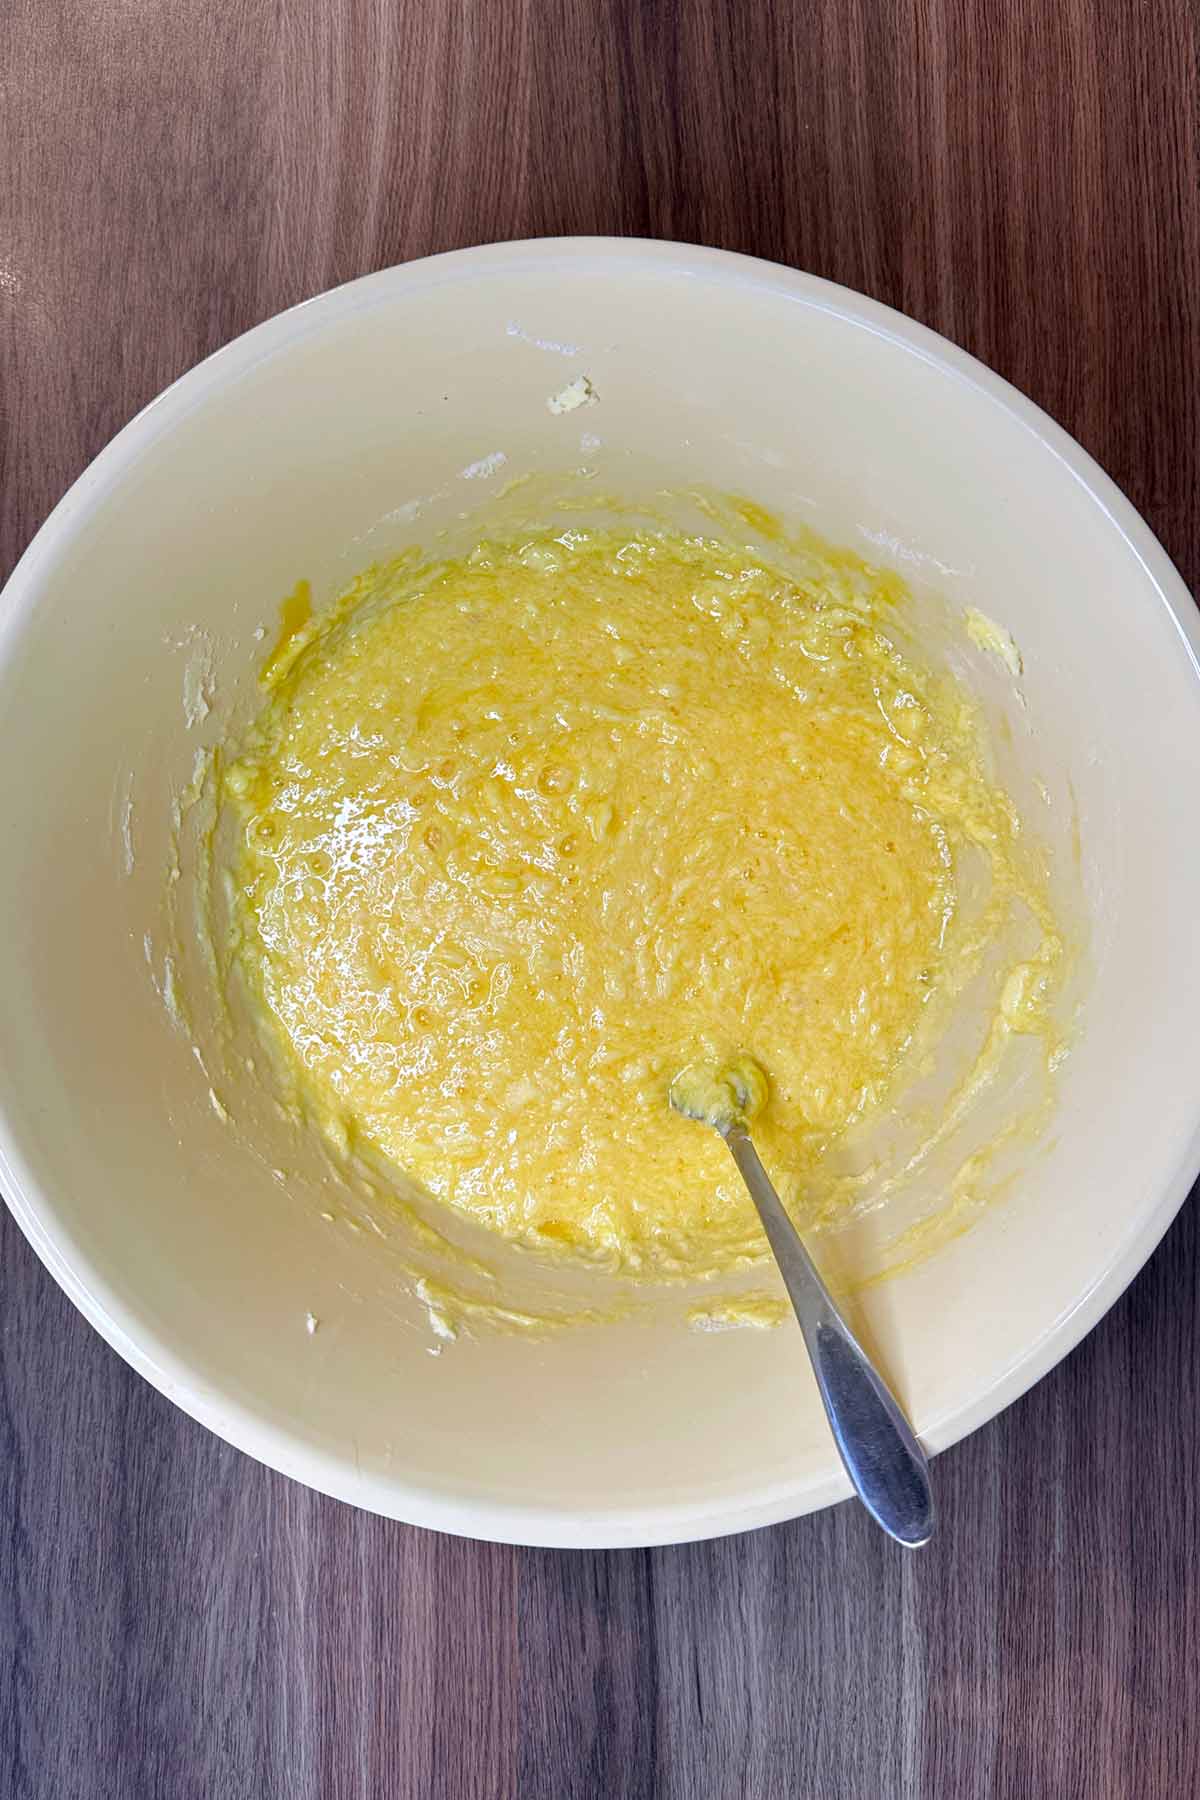 Eggs whisked into the mixture.